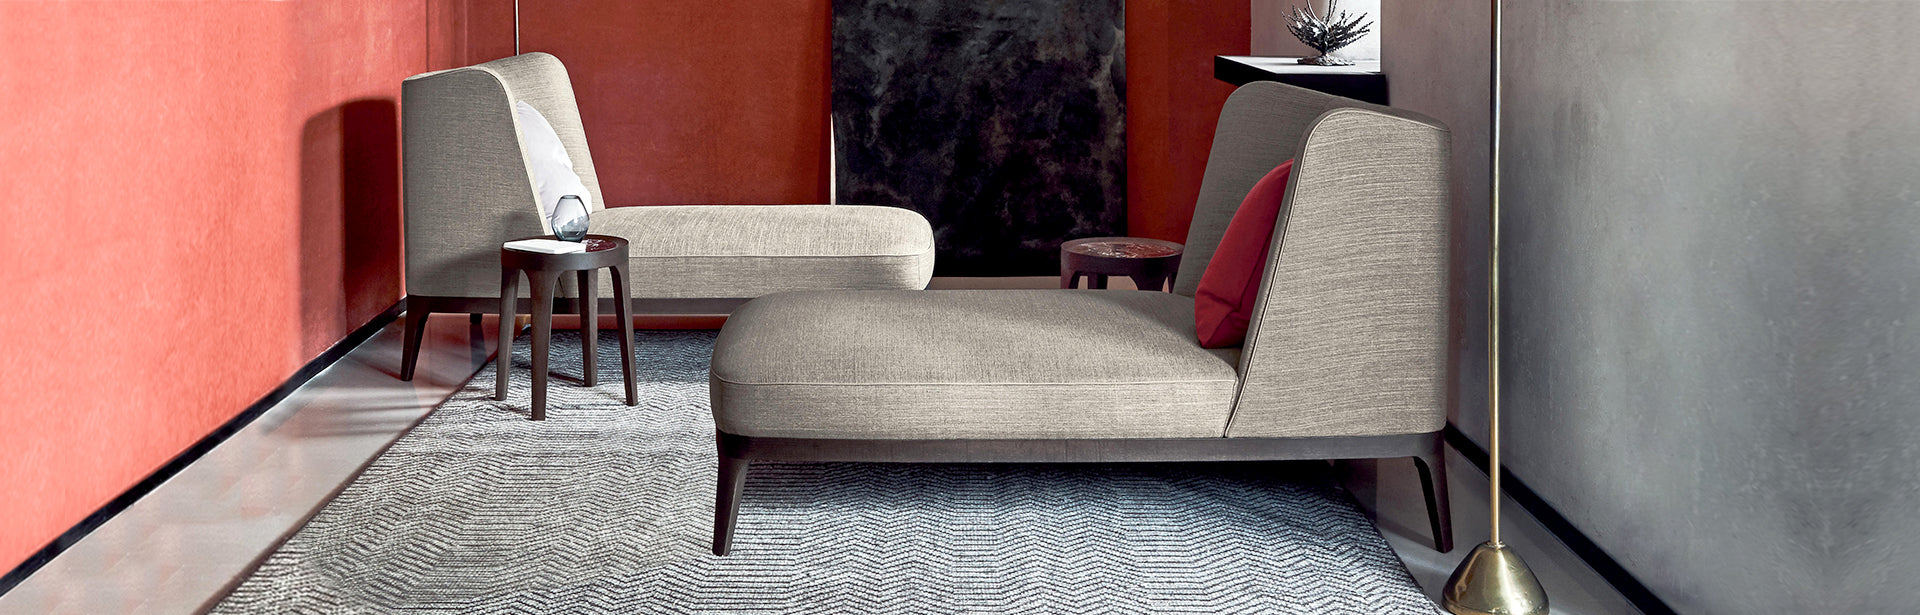 Chaise Lounges | Daybeds